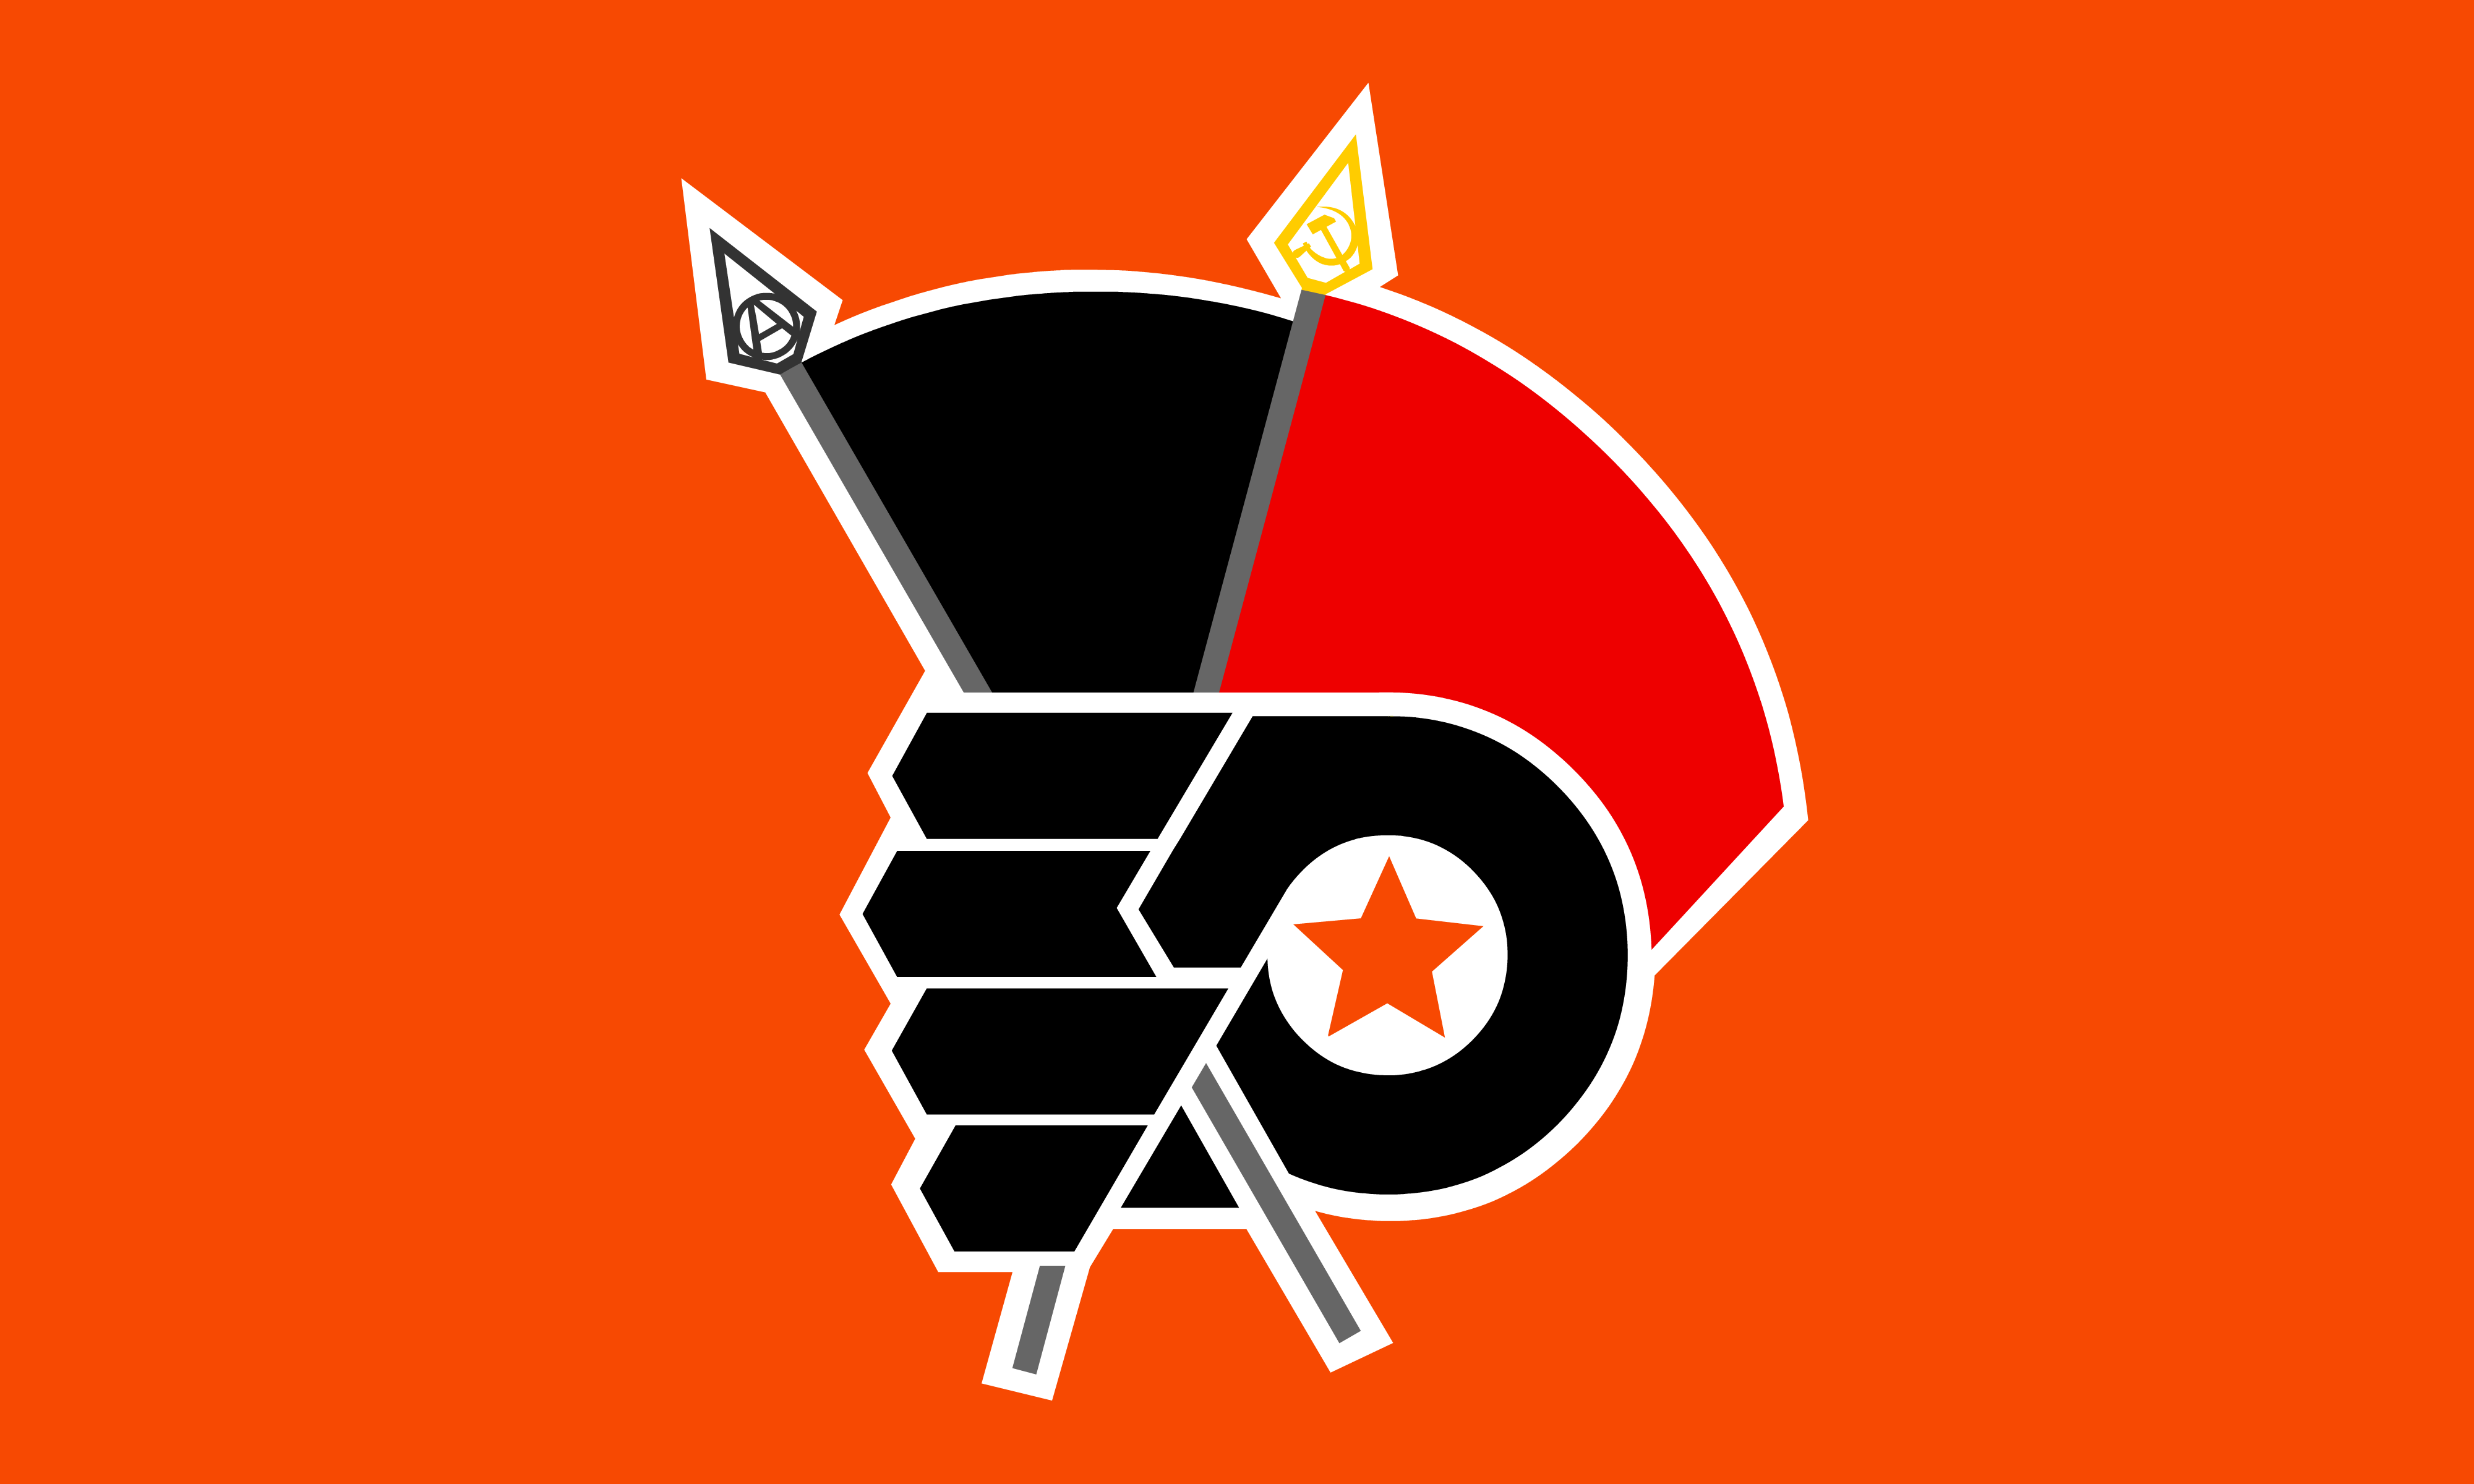 Gritty's Logo - Flag for Comrade Gritty, a fellow worker and Antifa Supersoldier ...